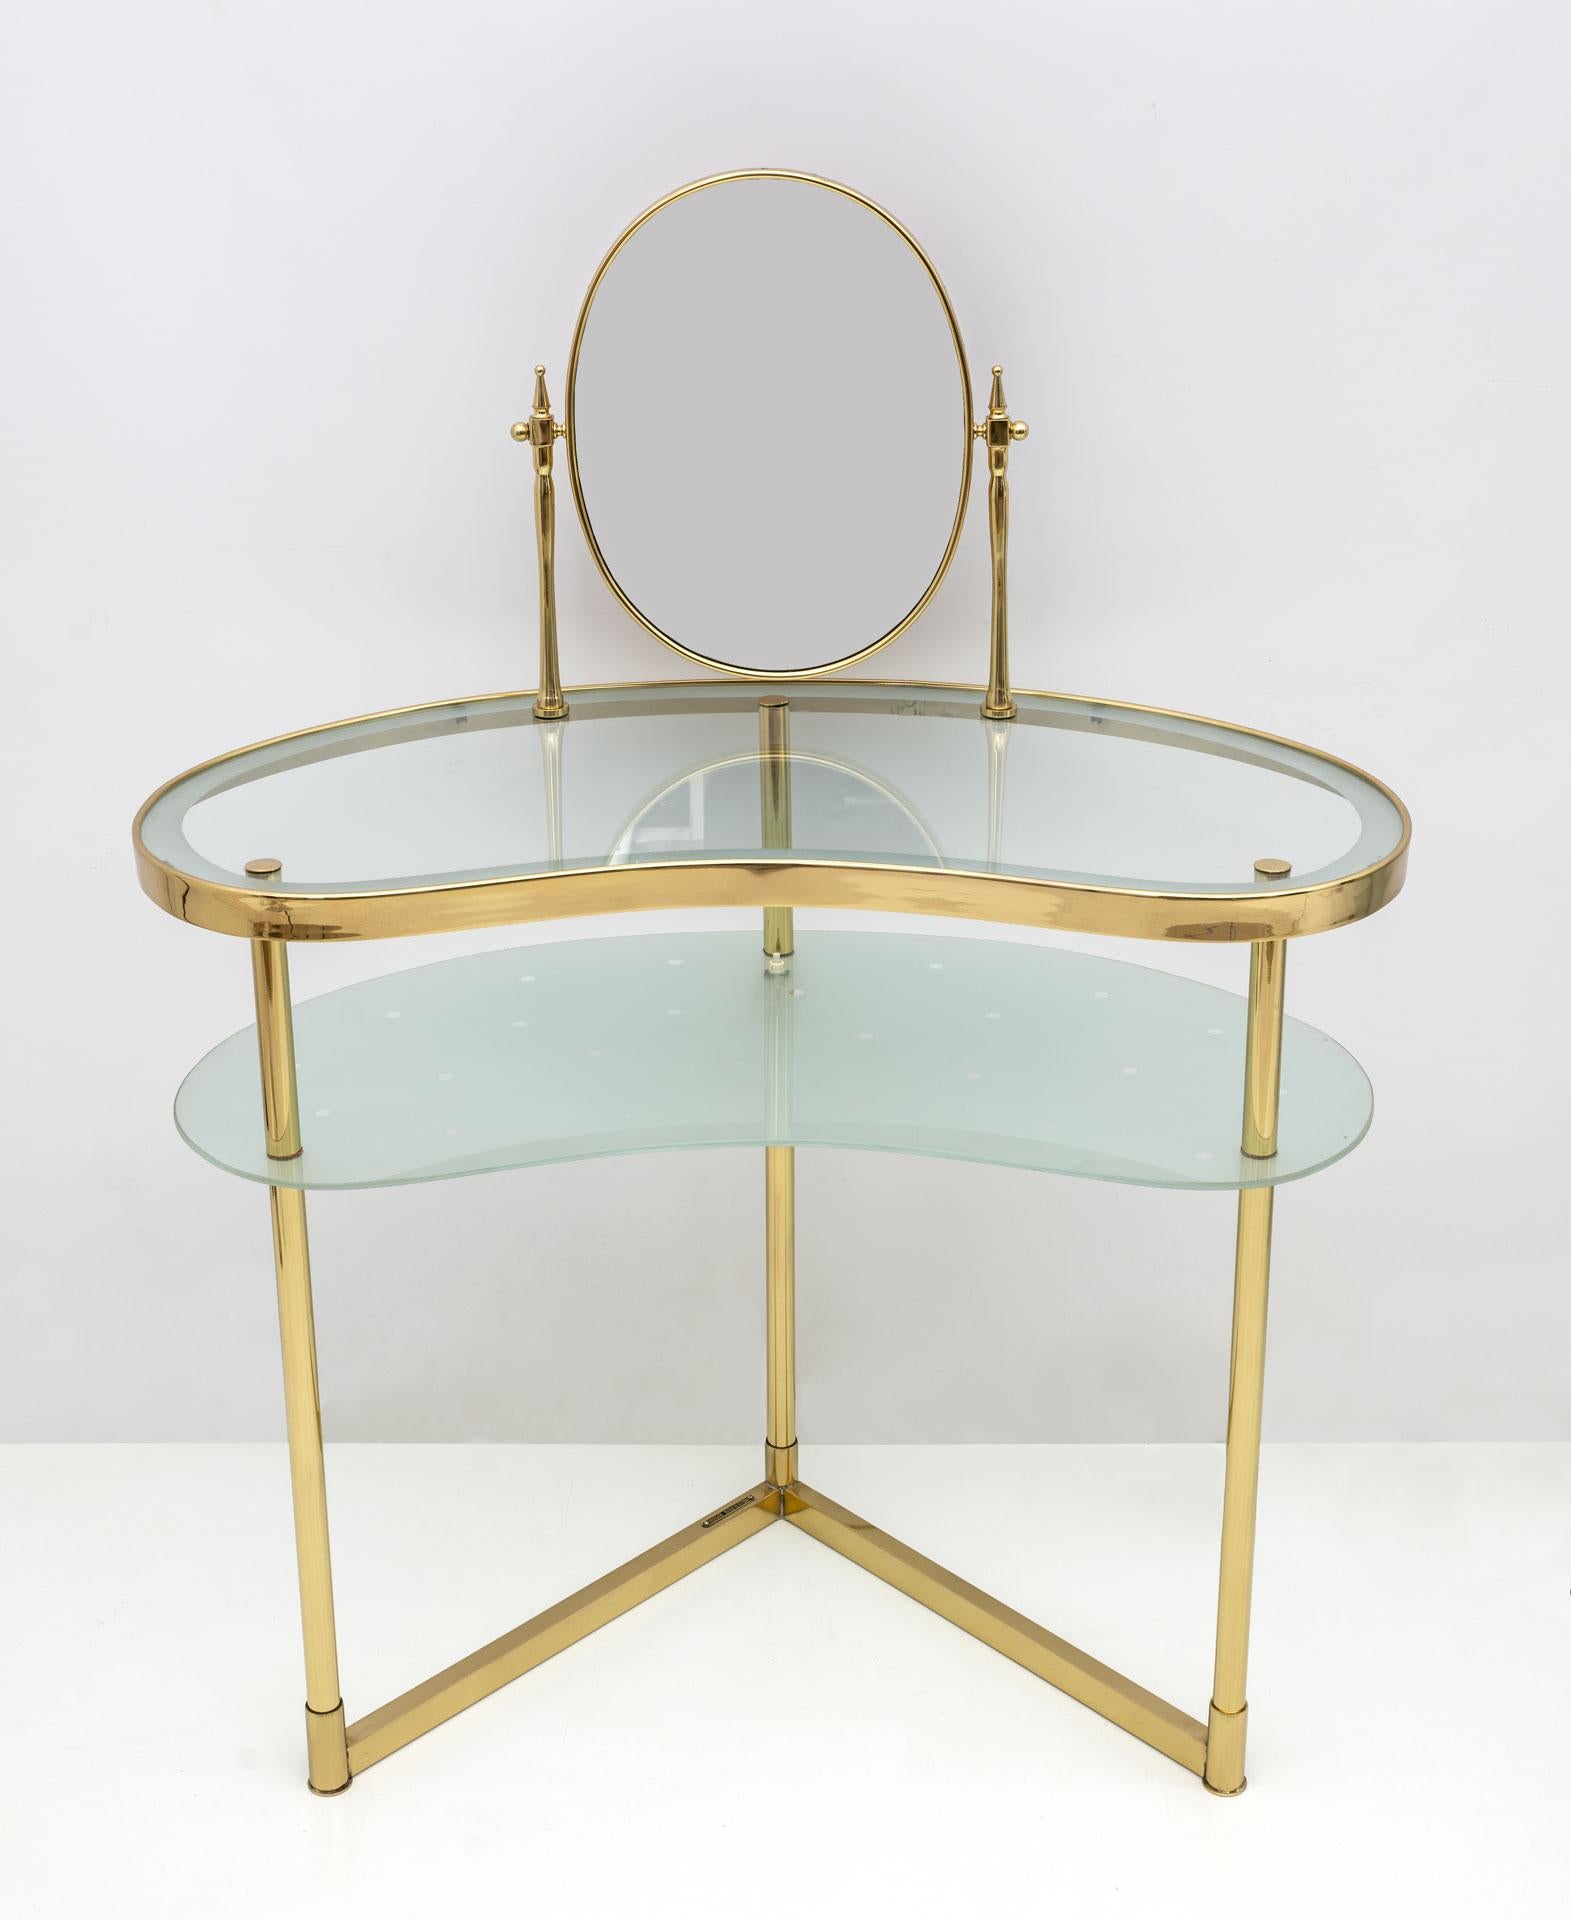 Produced in Italy in the 1940s and designed by Luigi Brusotti, wavy-shaped make-up table with brass structure and two decorated and partially etched glass shelves, with lighting.
The brass is in perfect condition as shown in the photos, some small